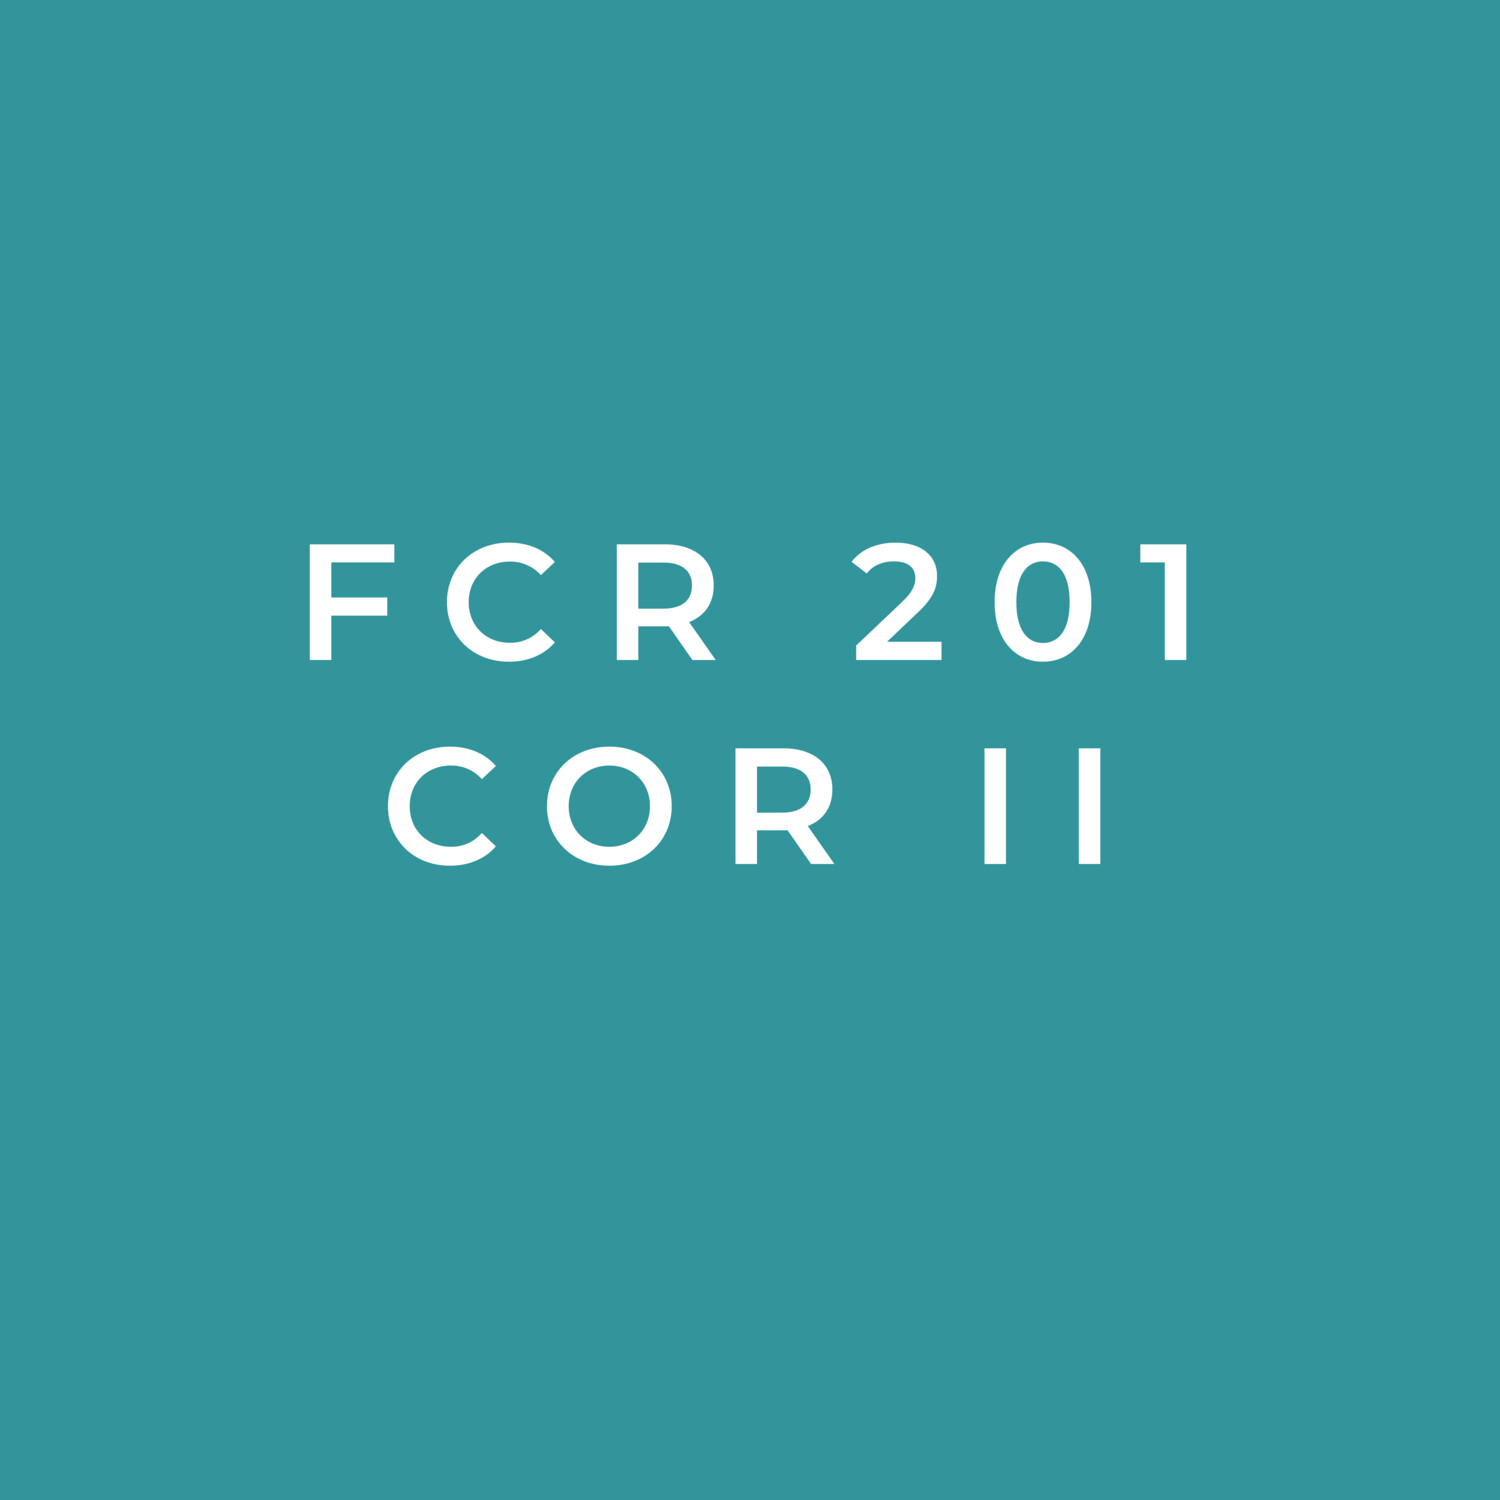 FCR 201 COR II: Contracting Officer’s Representative Level II Course